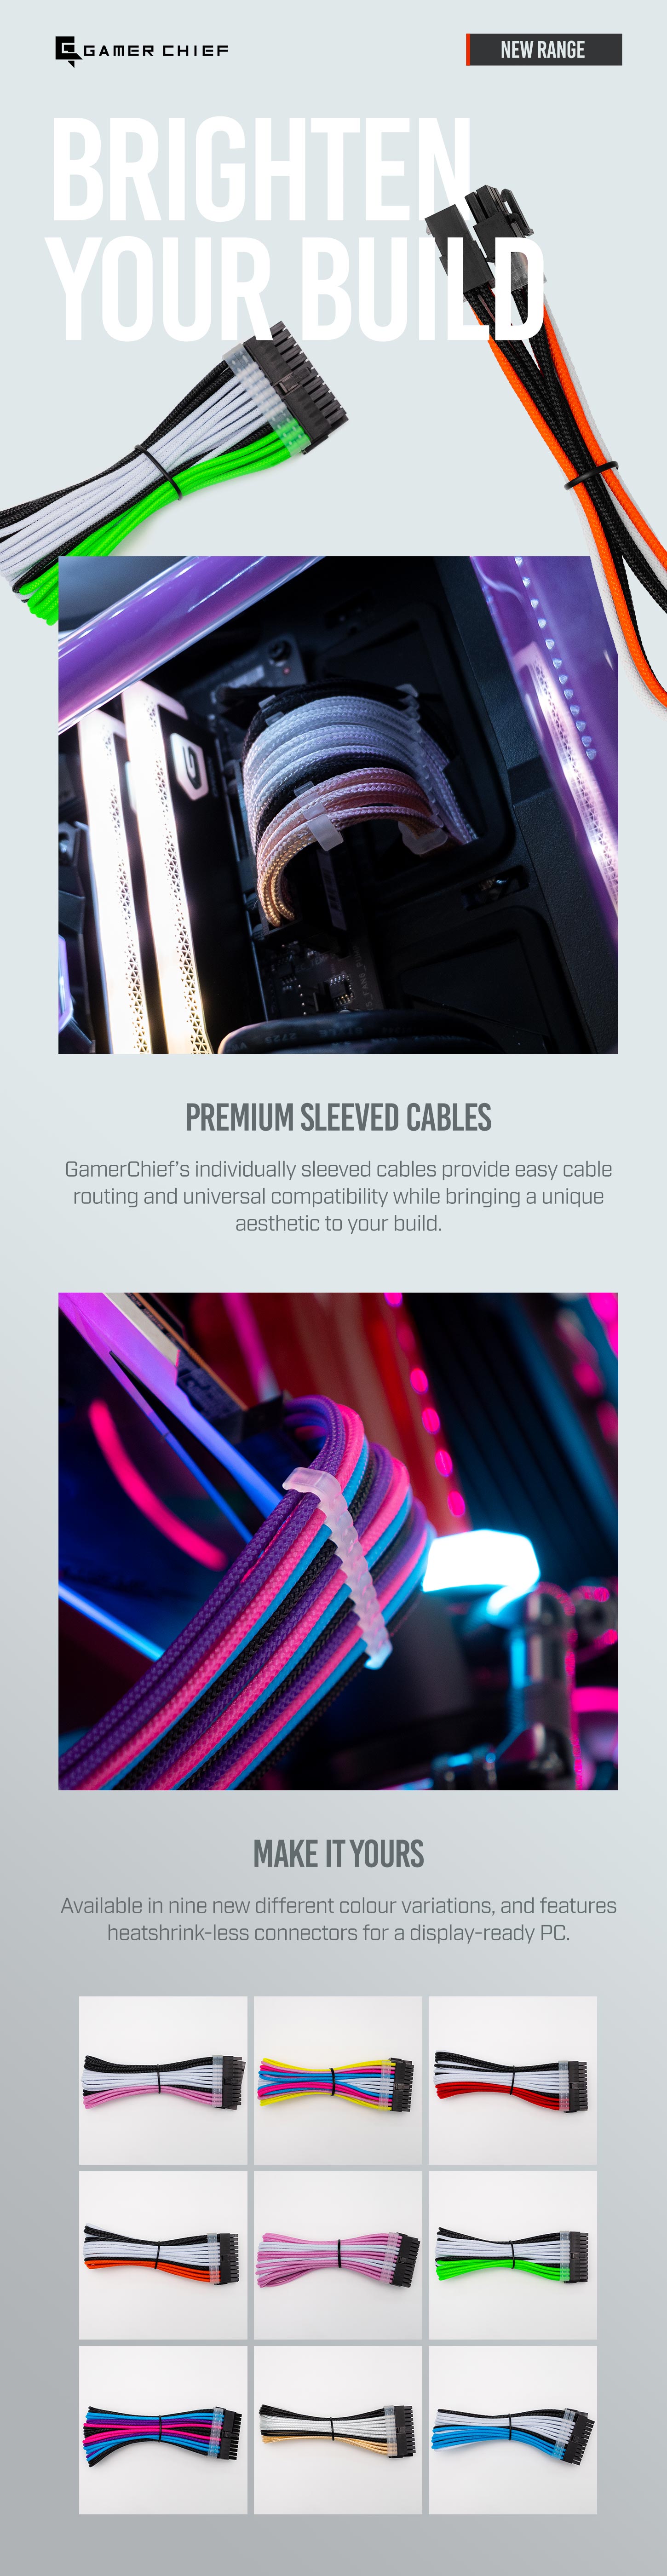 A large marketing image providing additional information about the product GamerChief Elite Series 8-Pin PCIe 30cm Sleeved Extension Cable (Orange/White/Black) - Additional alt info not provided